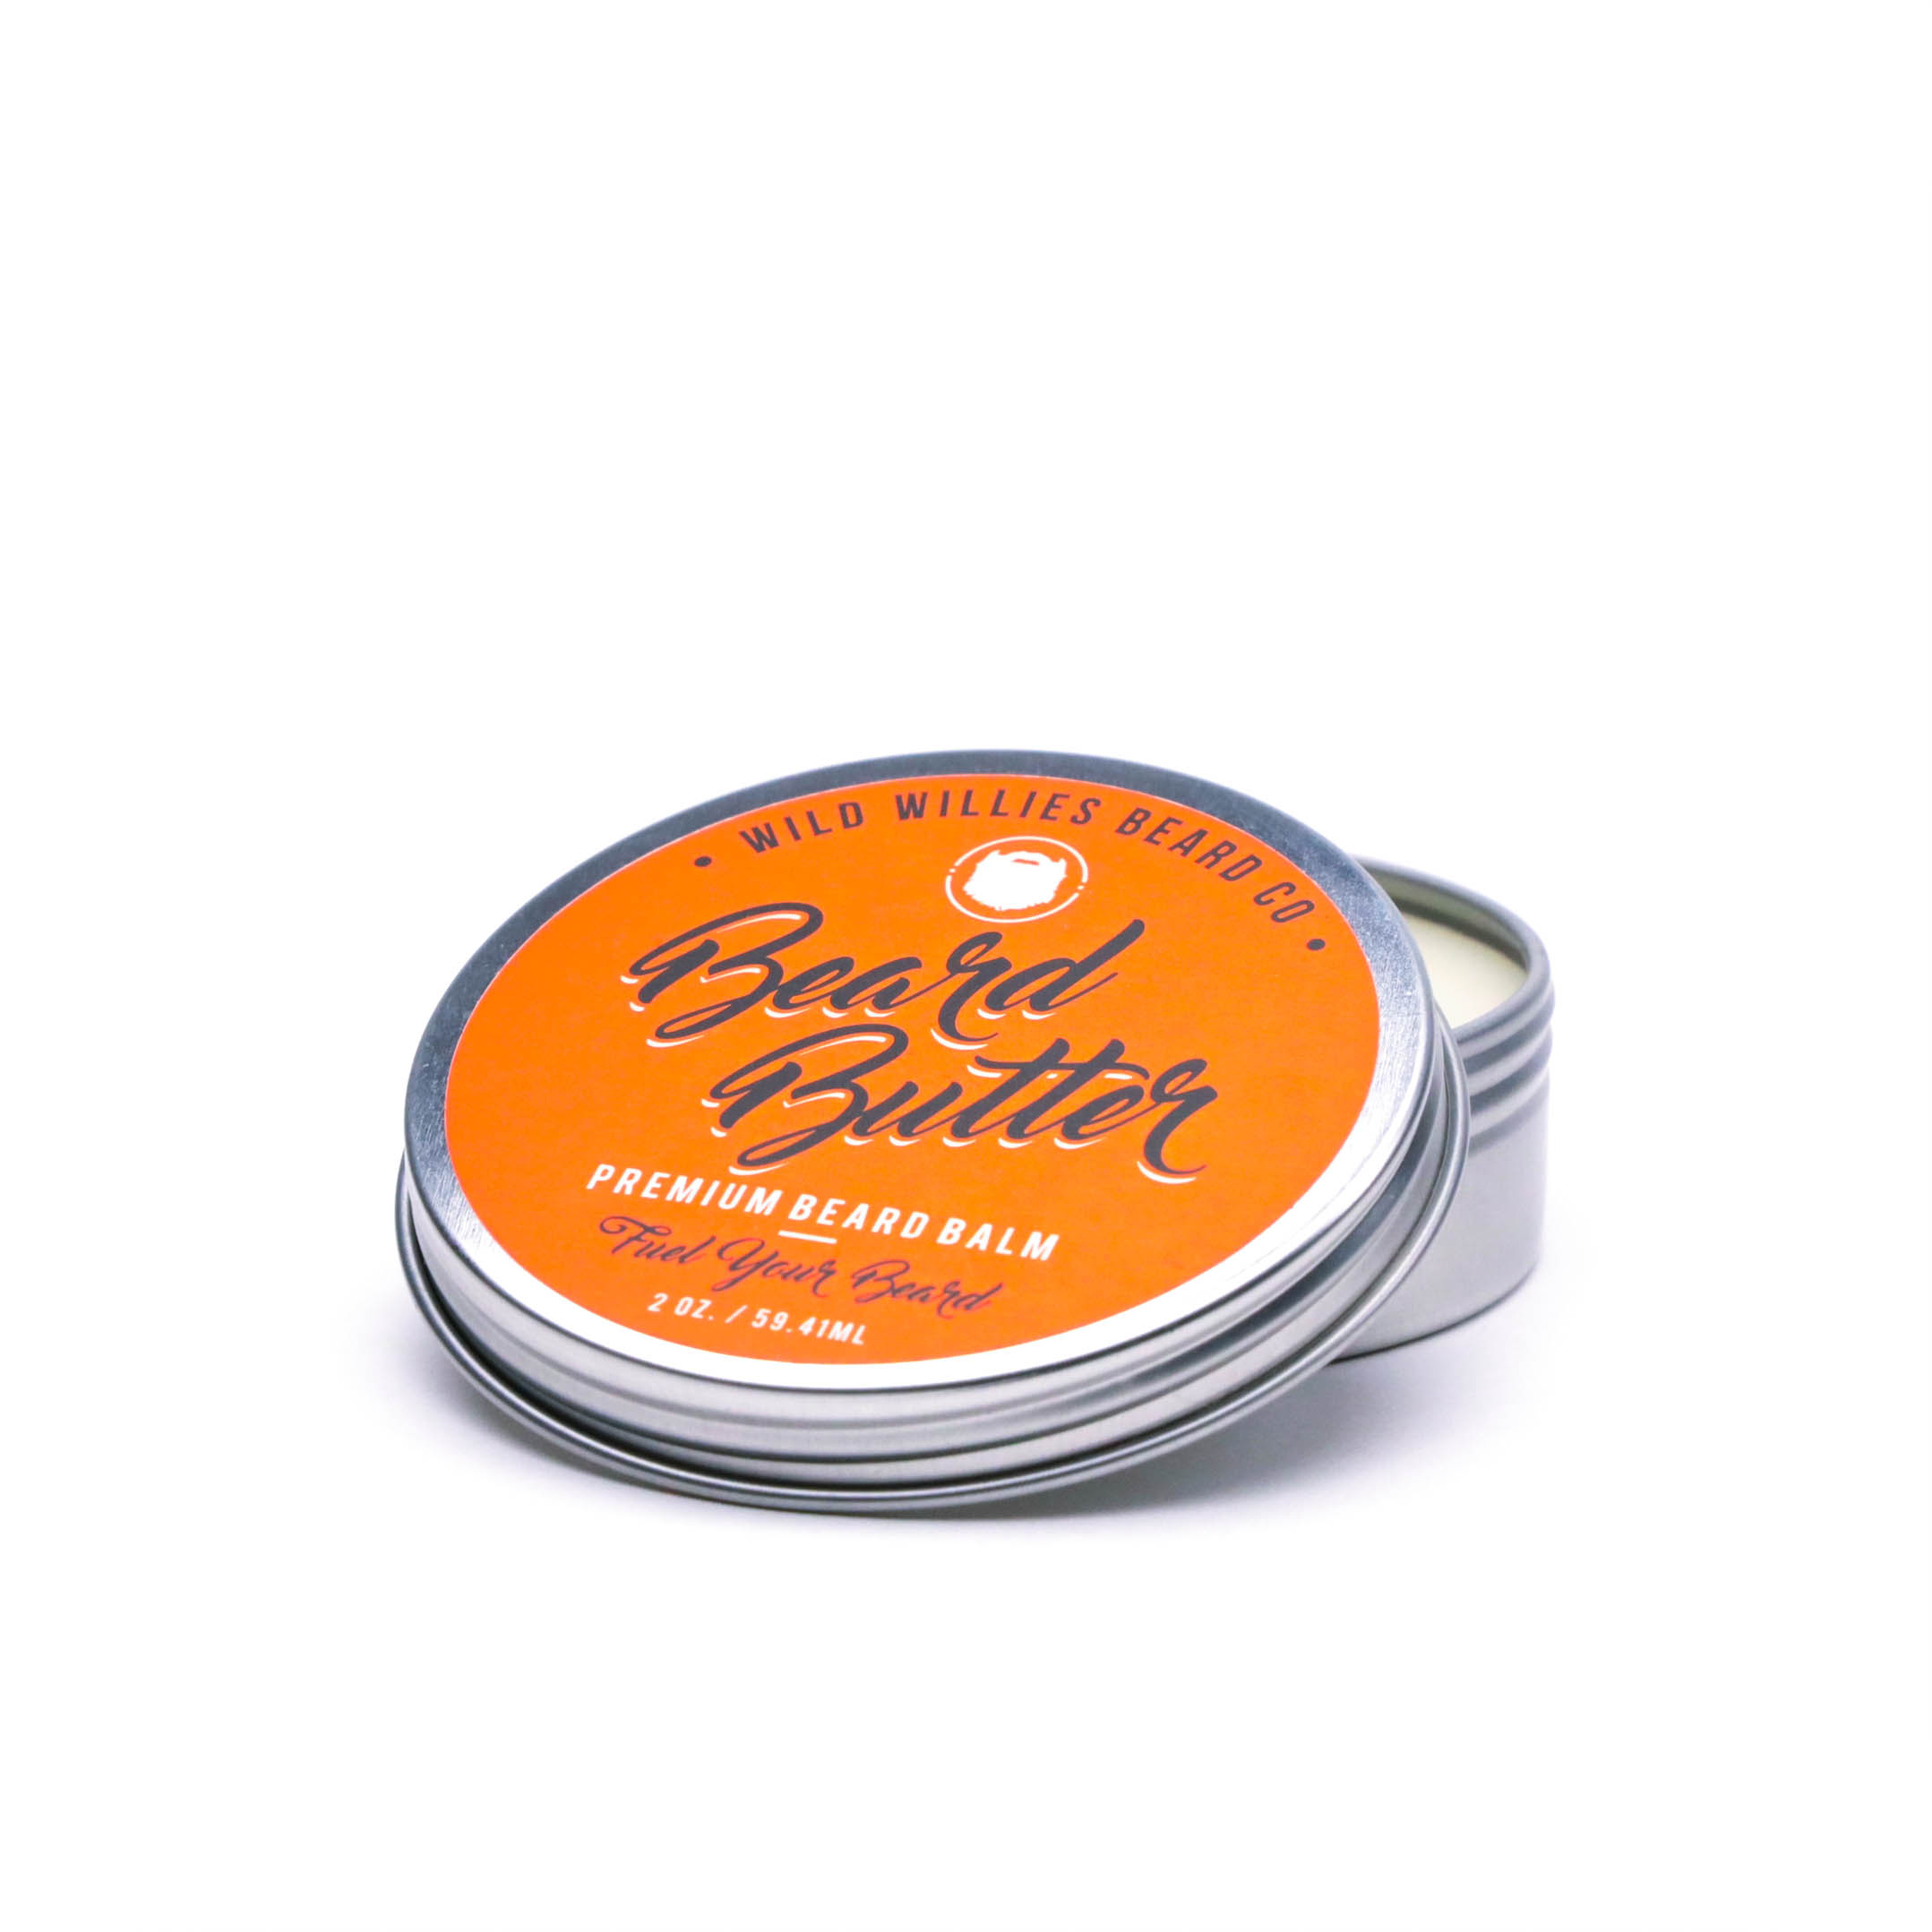 Dapper Dan Nourishing Beard Balm, Blend of Essential Oils And Waxes to  Shape, Style and Nourish Moustaches and Beard, Vanilla and Raspberry Scent,  1 x